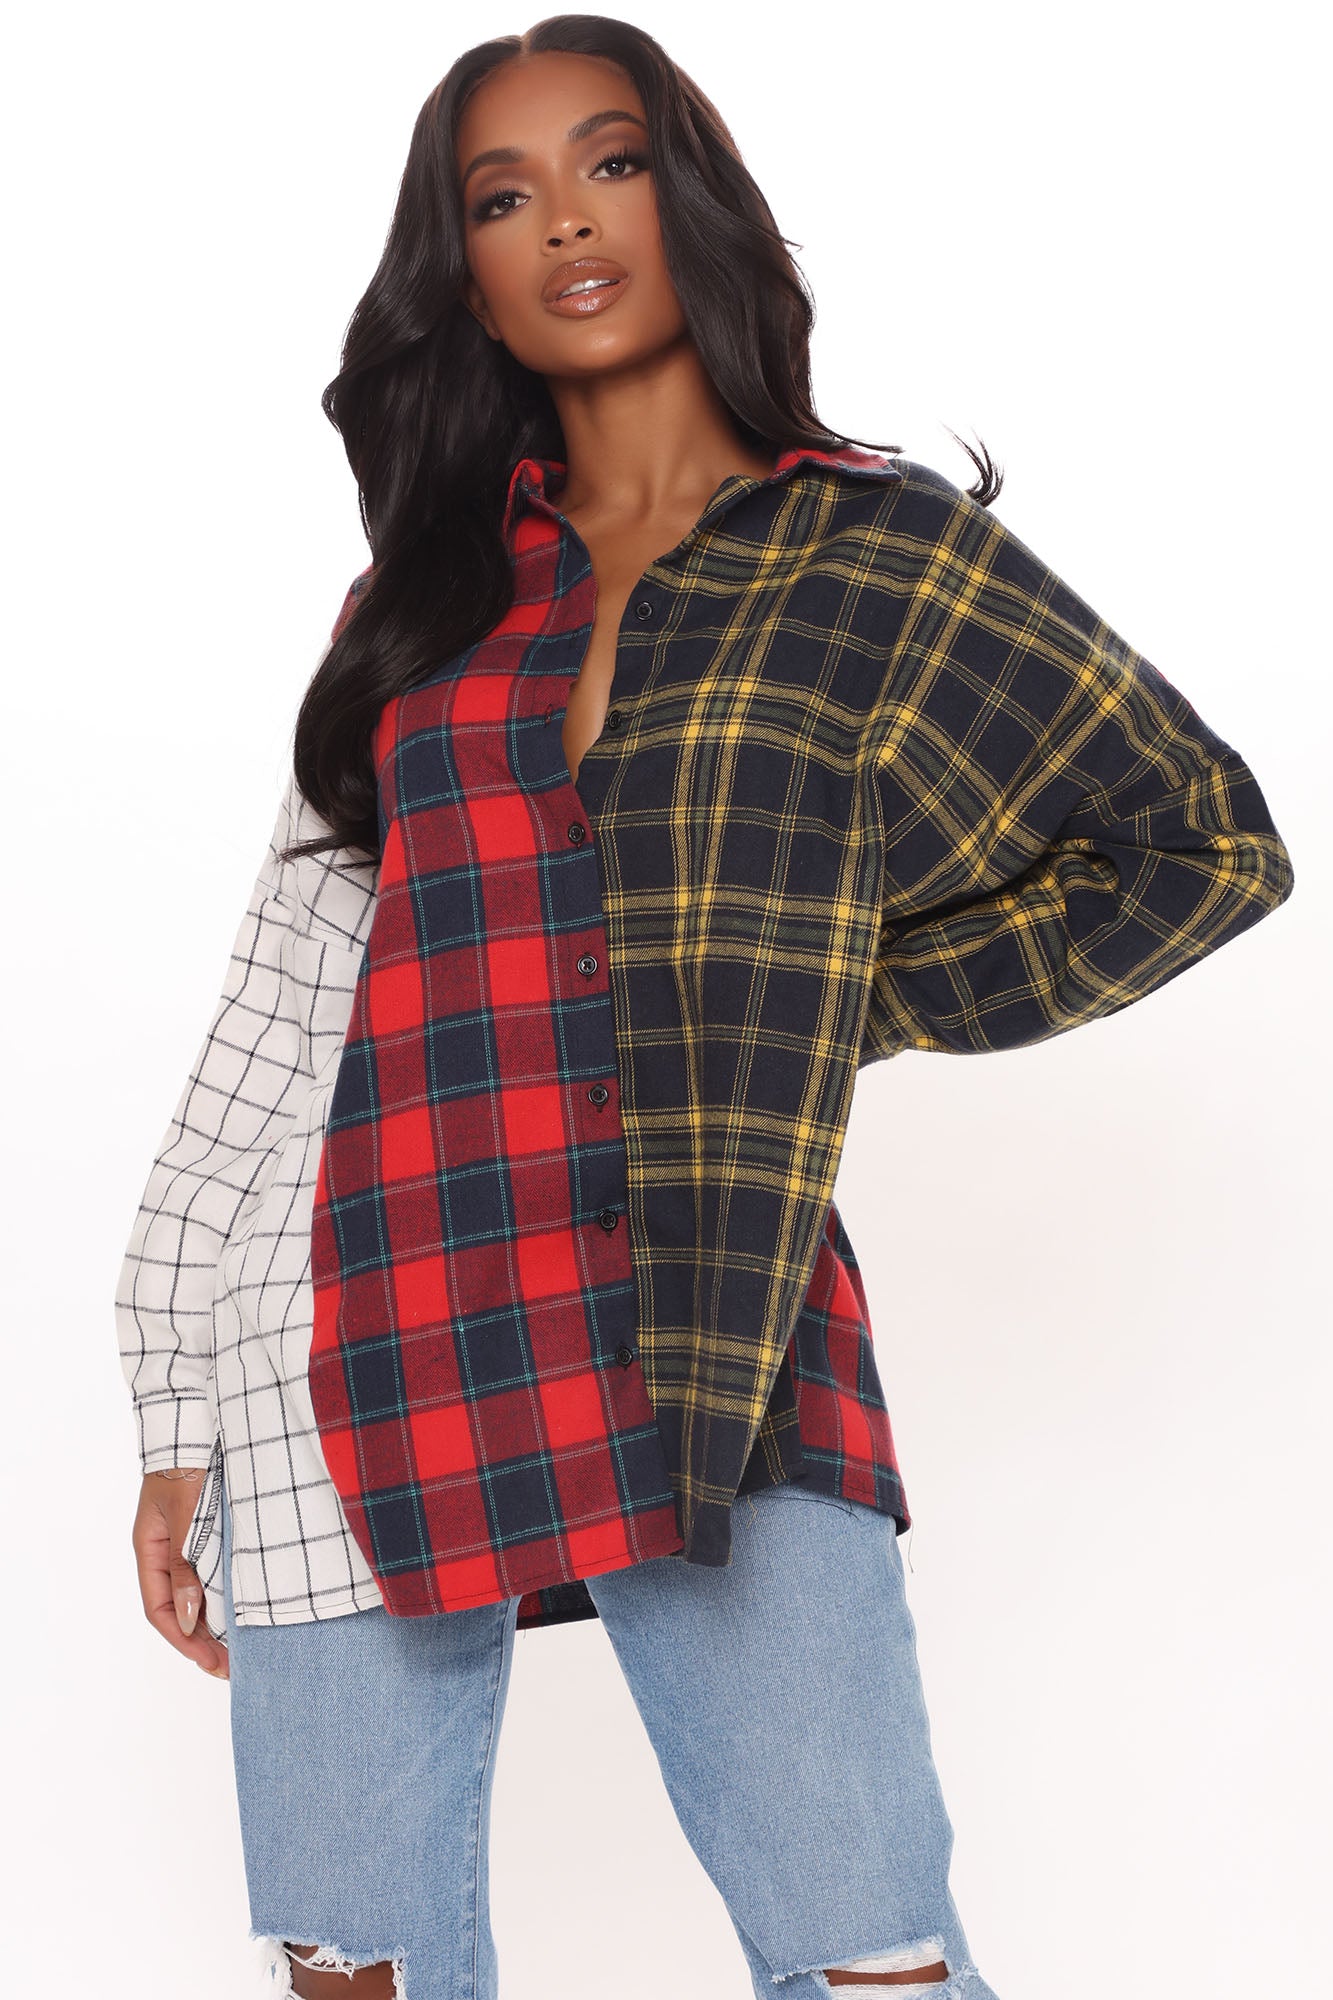 Mixed Emotions Mixed Feelings Flannel Top - Red/combo | Fashion